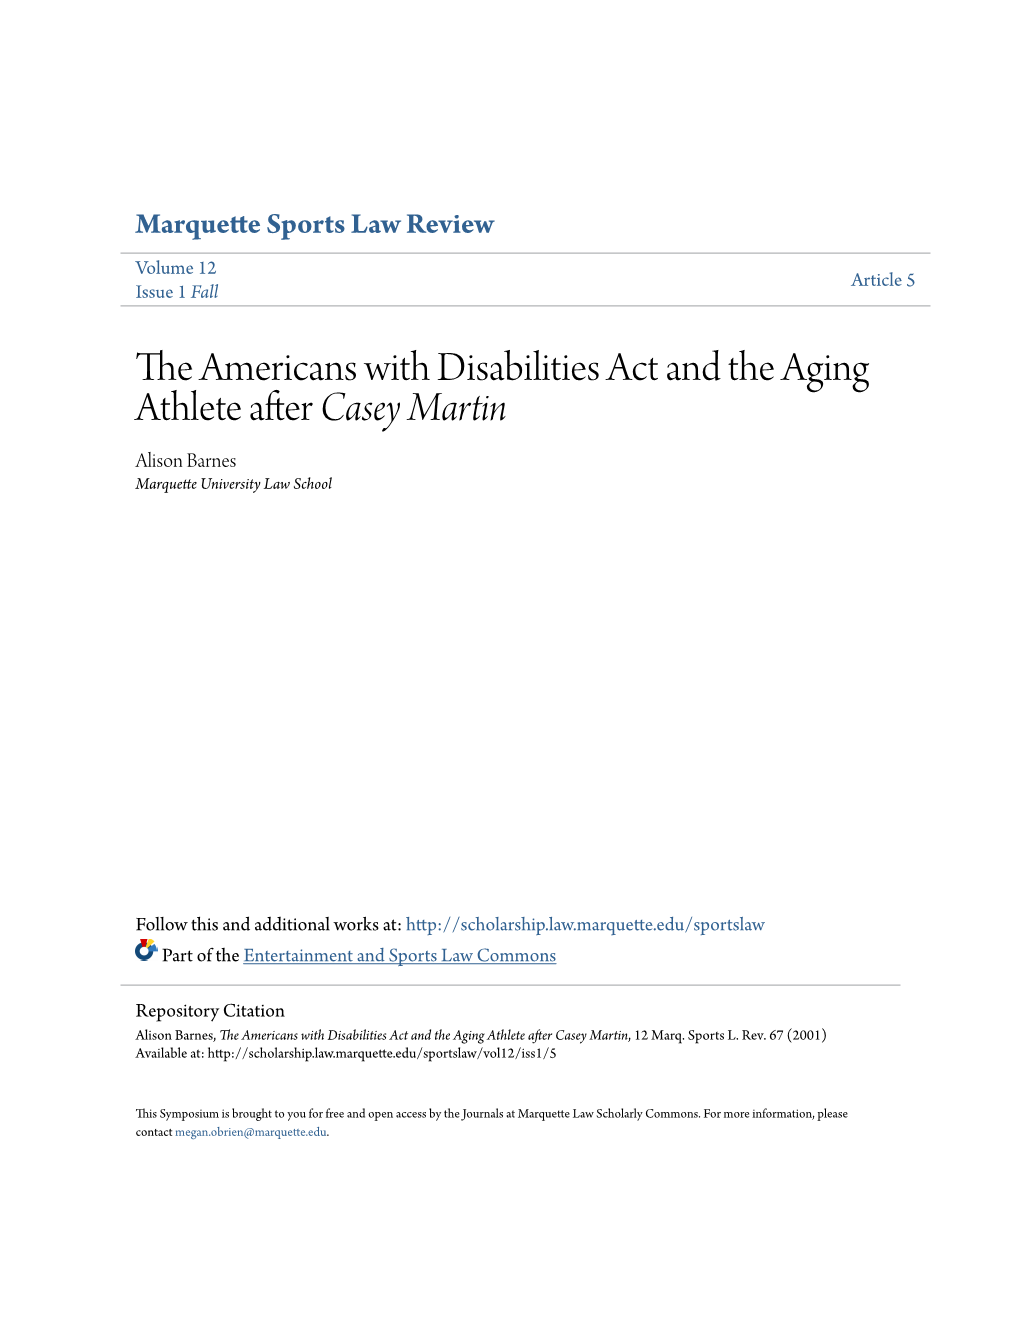 The Americans with Disabilities Act and the Aging Athlete After Casey Martin Alison Barnes Marquette University Law School